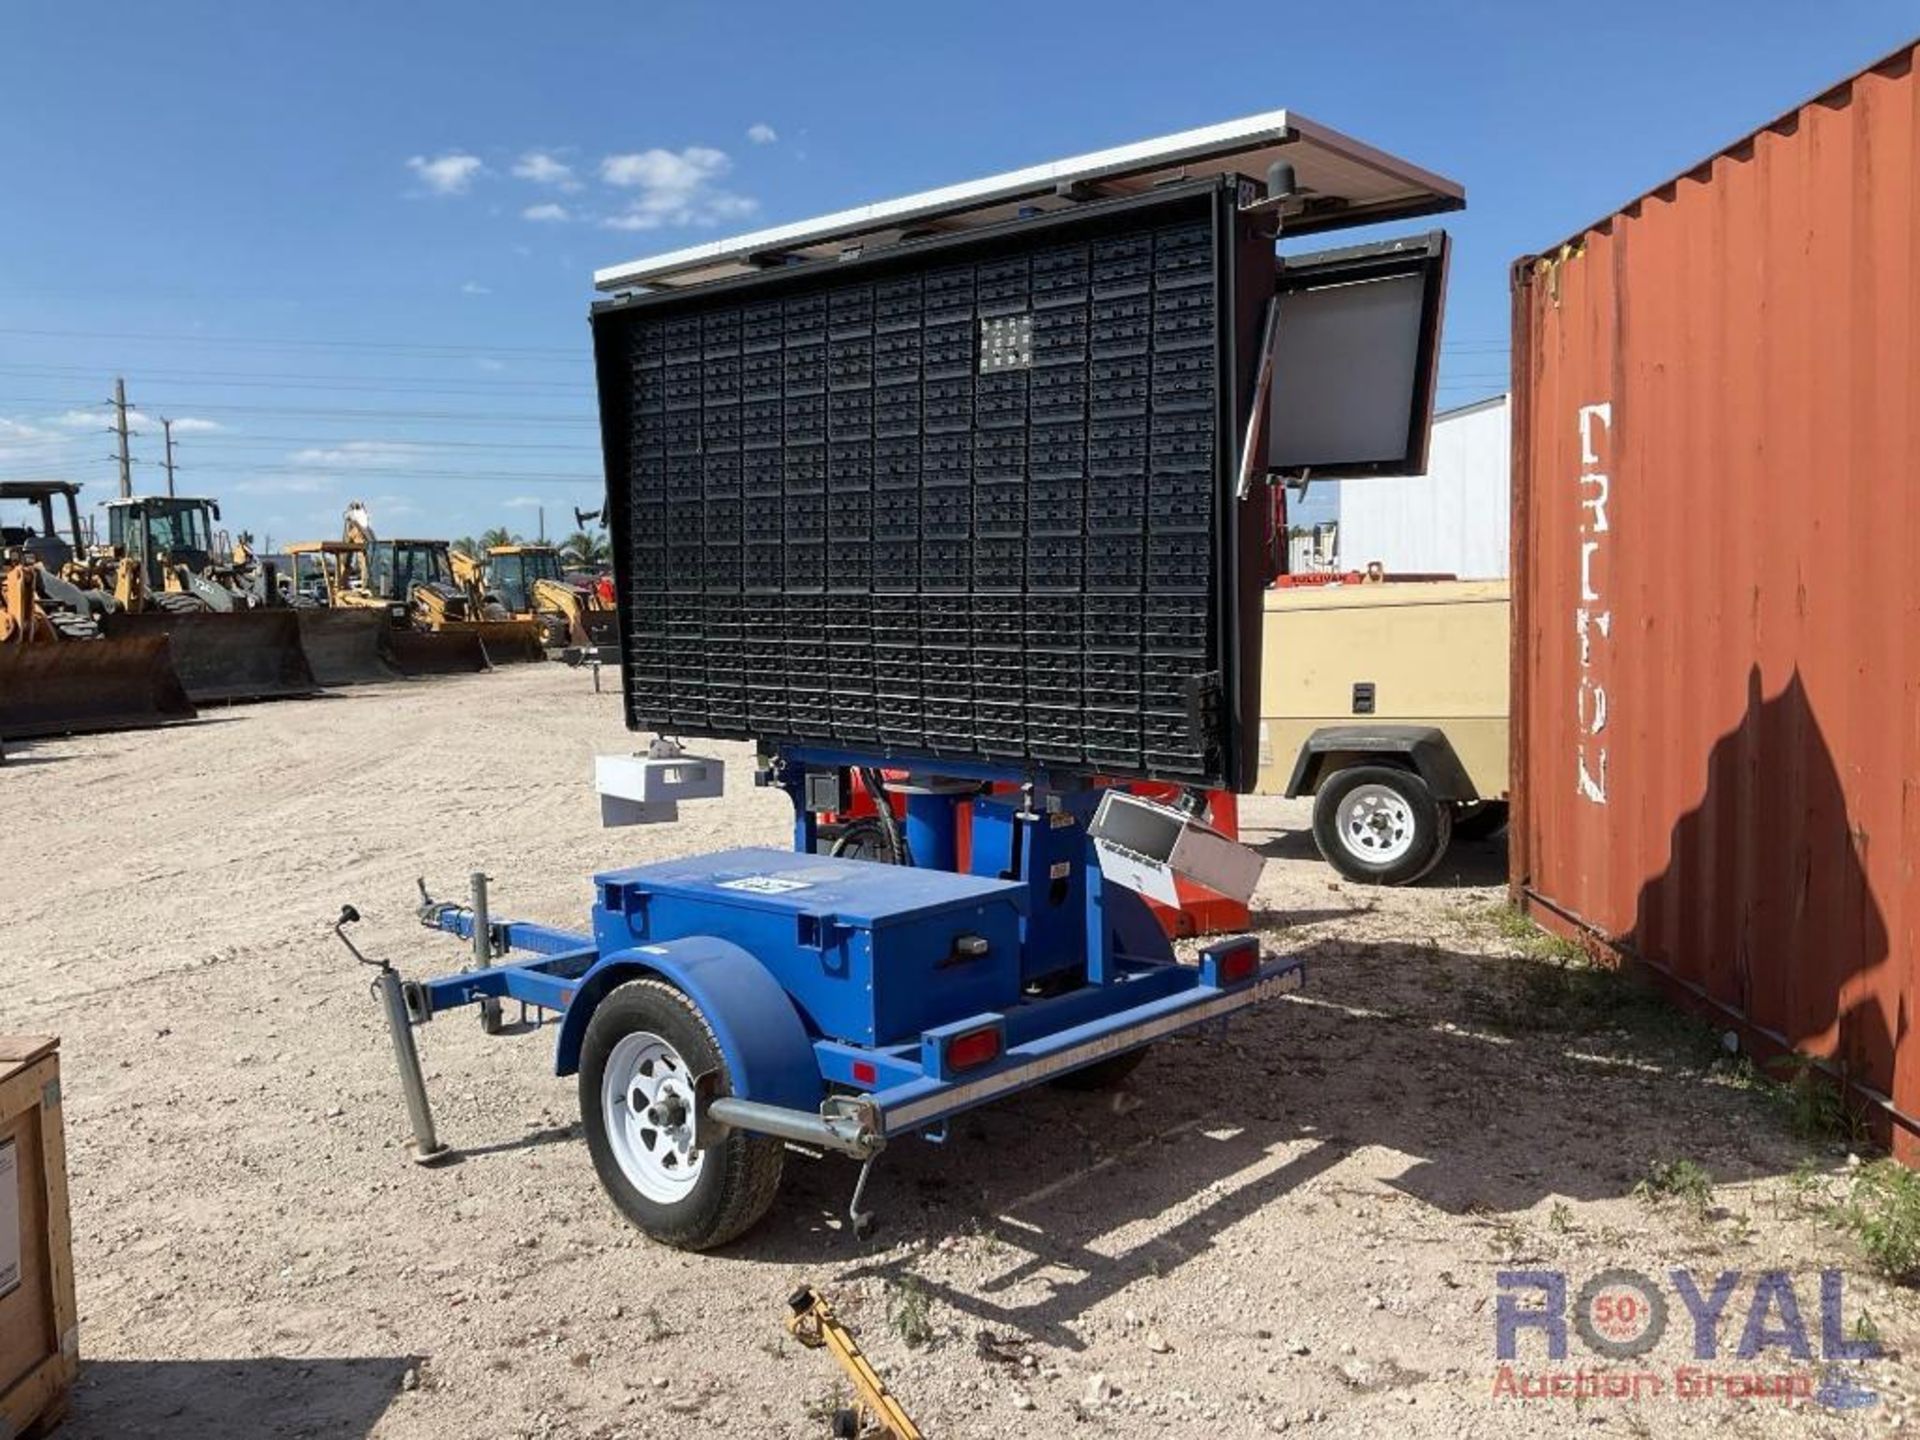 2018 Wanco Solar Towable Traffic Control Message Board - Image 2 of 16